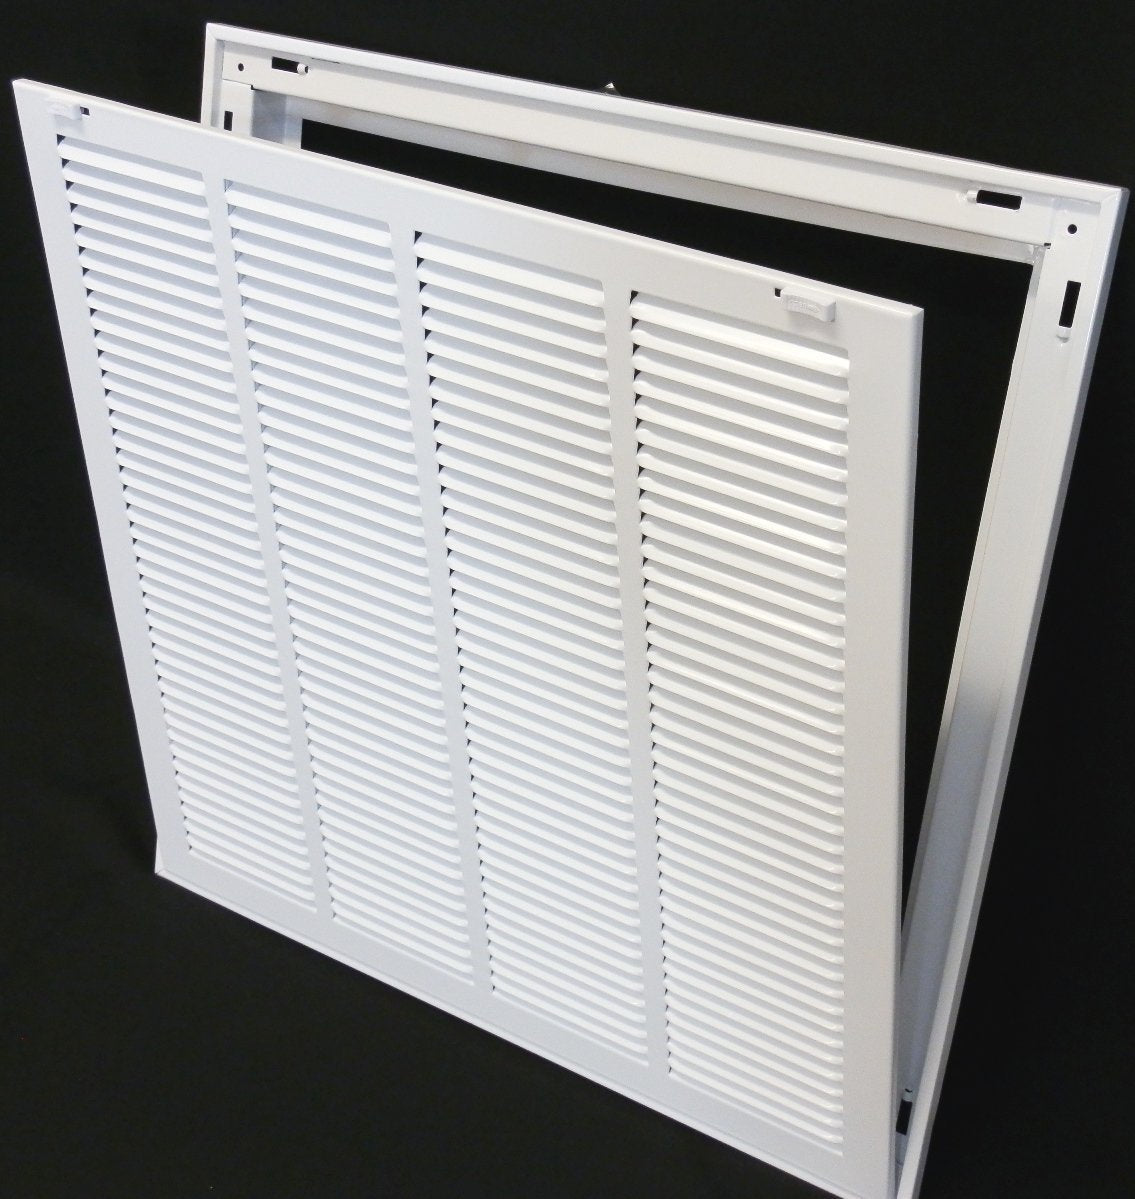 8&quot; X 12&quot; Steel Return Air Filter Grille for 1&quot; Filter - Removable Frame - [Outer Dimensions: 10 5/8&quot; X 14 5/8&quot;]